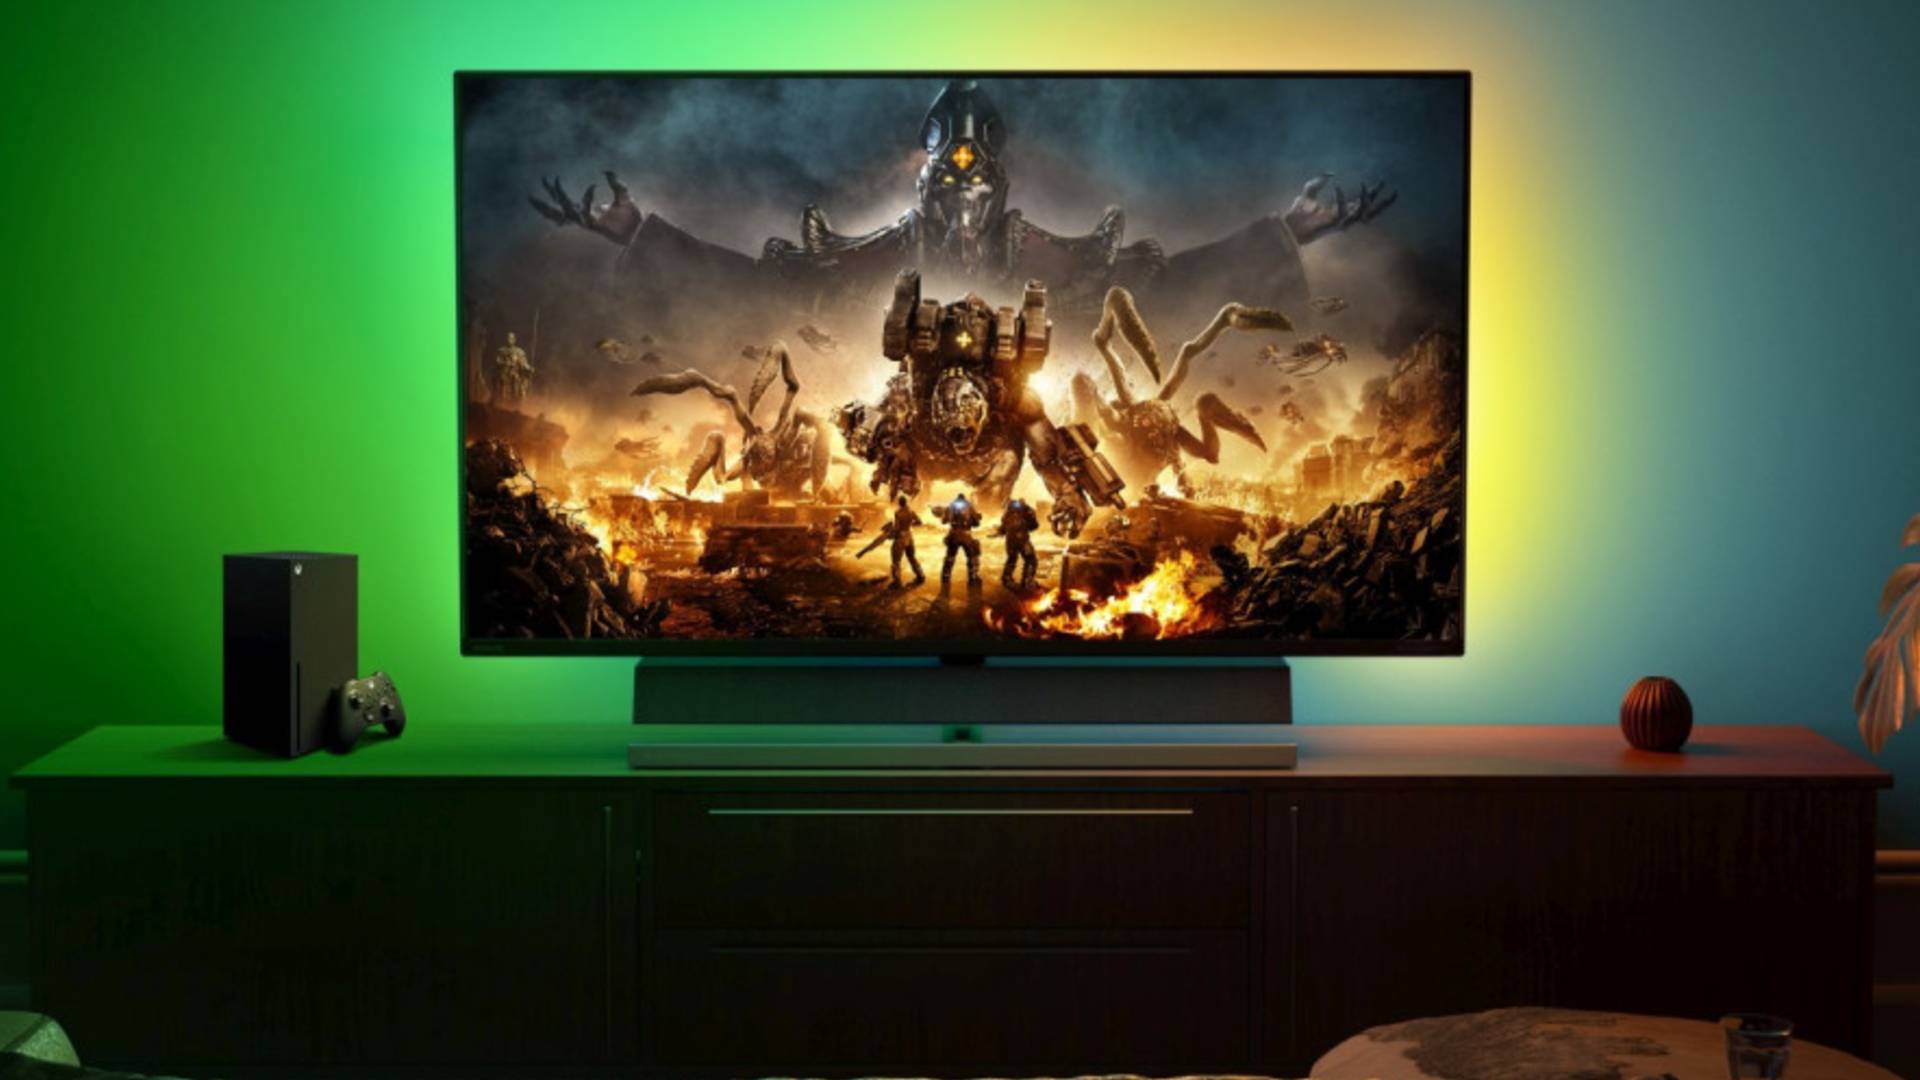 Microsoft announces new Designed for Xbox monitors from partners